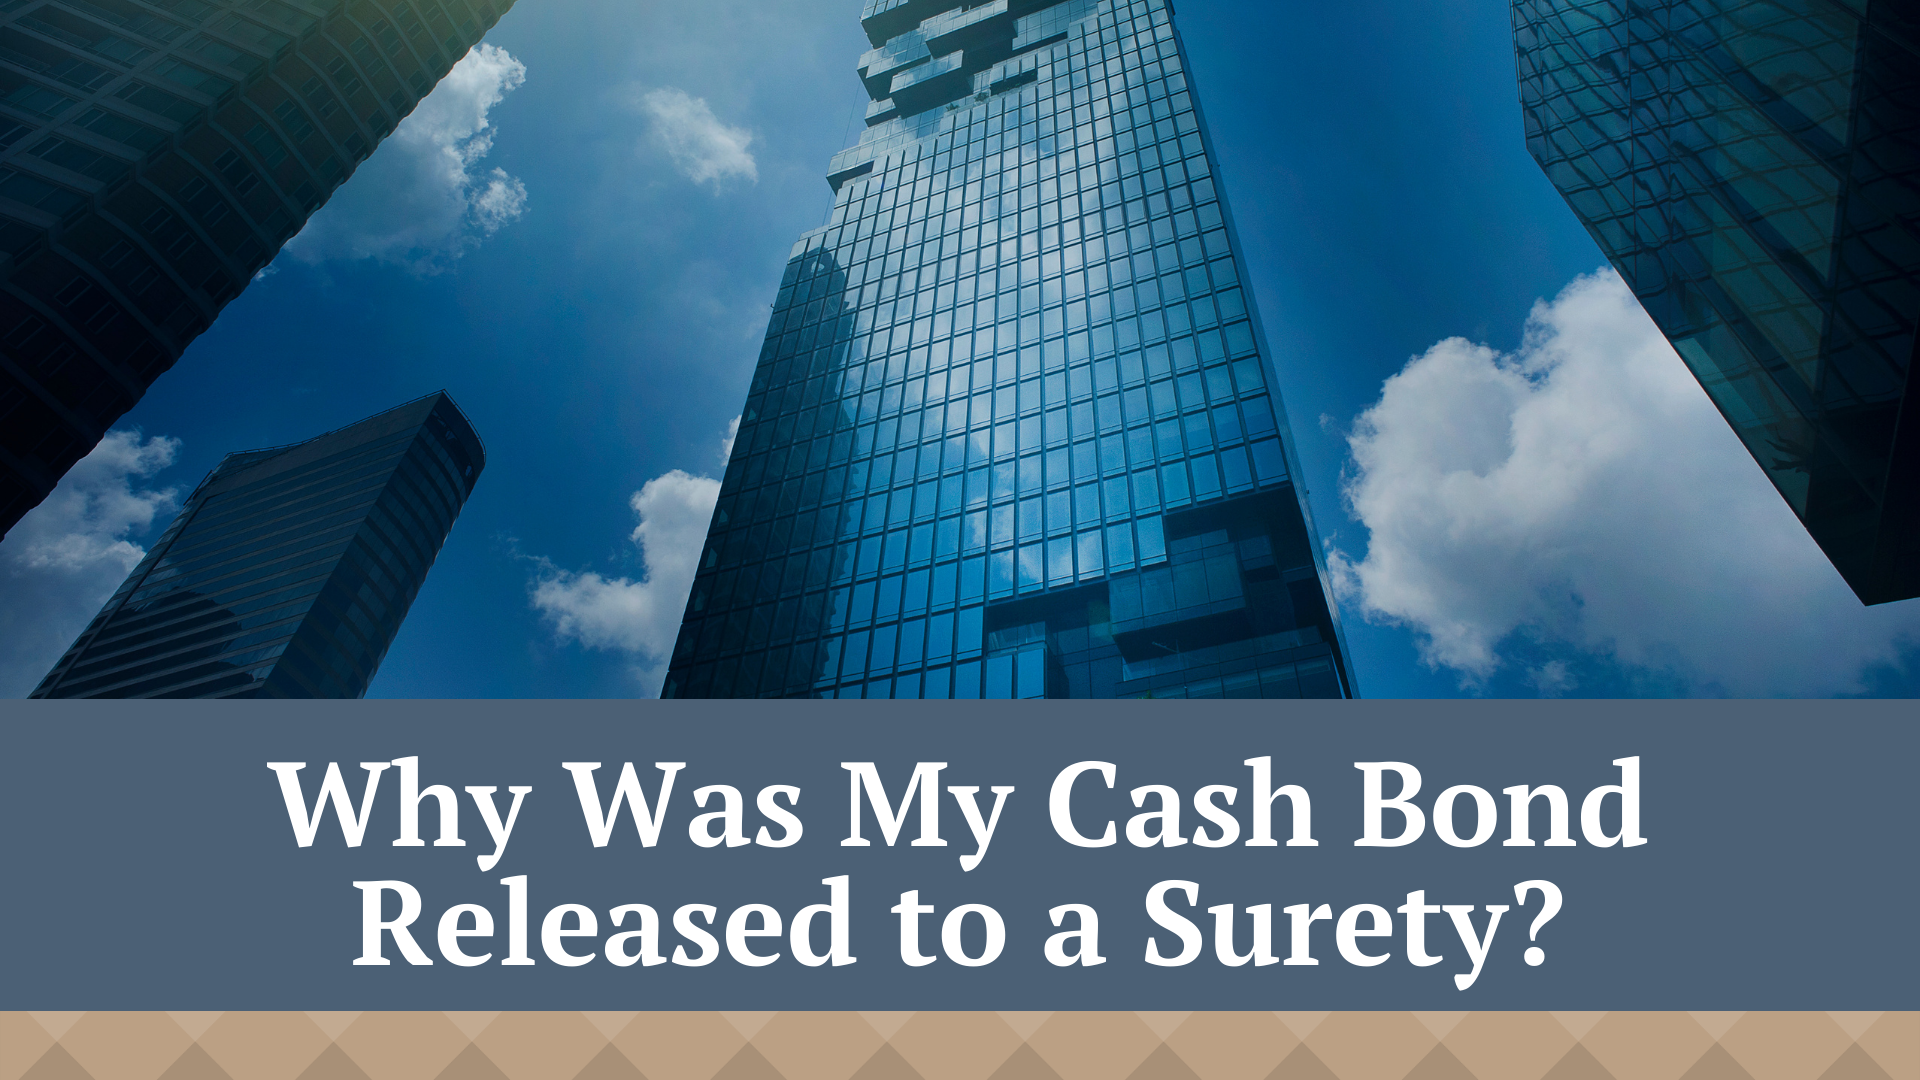 surety bond - Why was my cash bond released to a surety - buildings